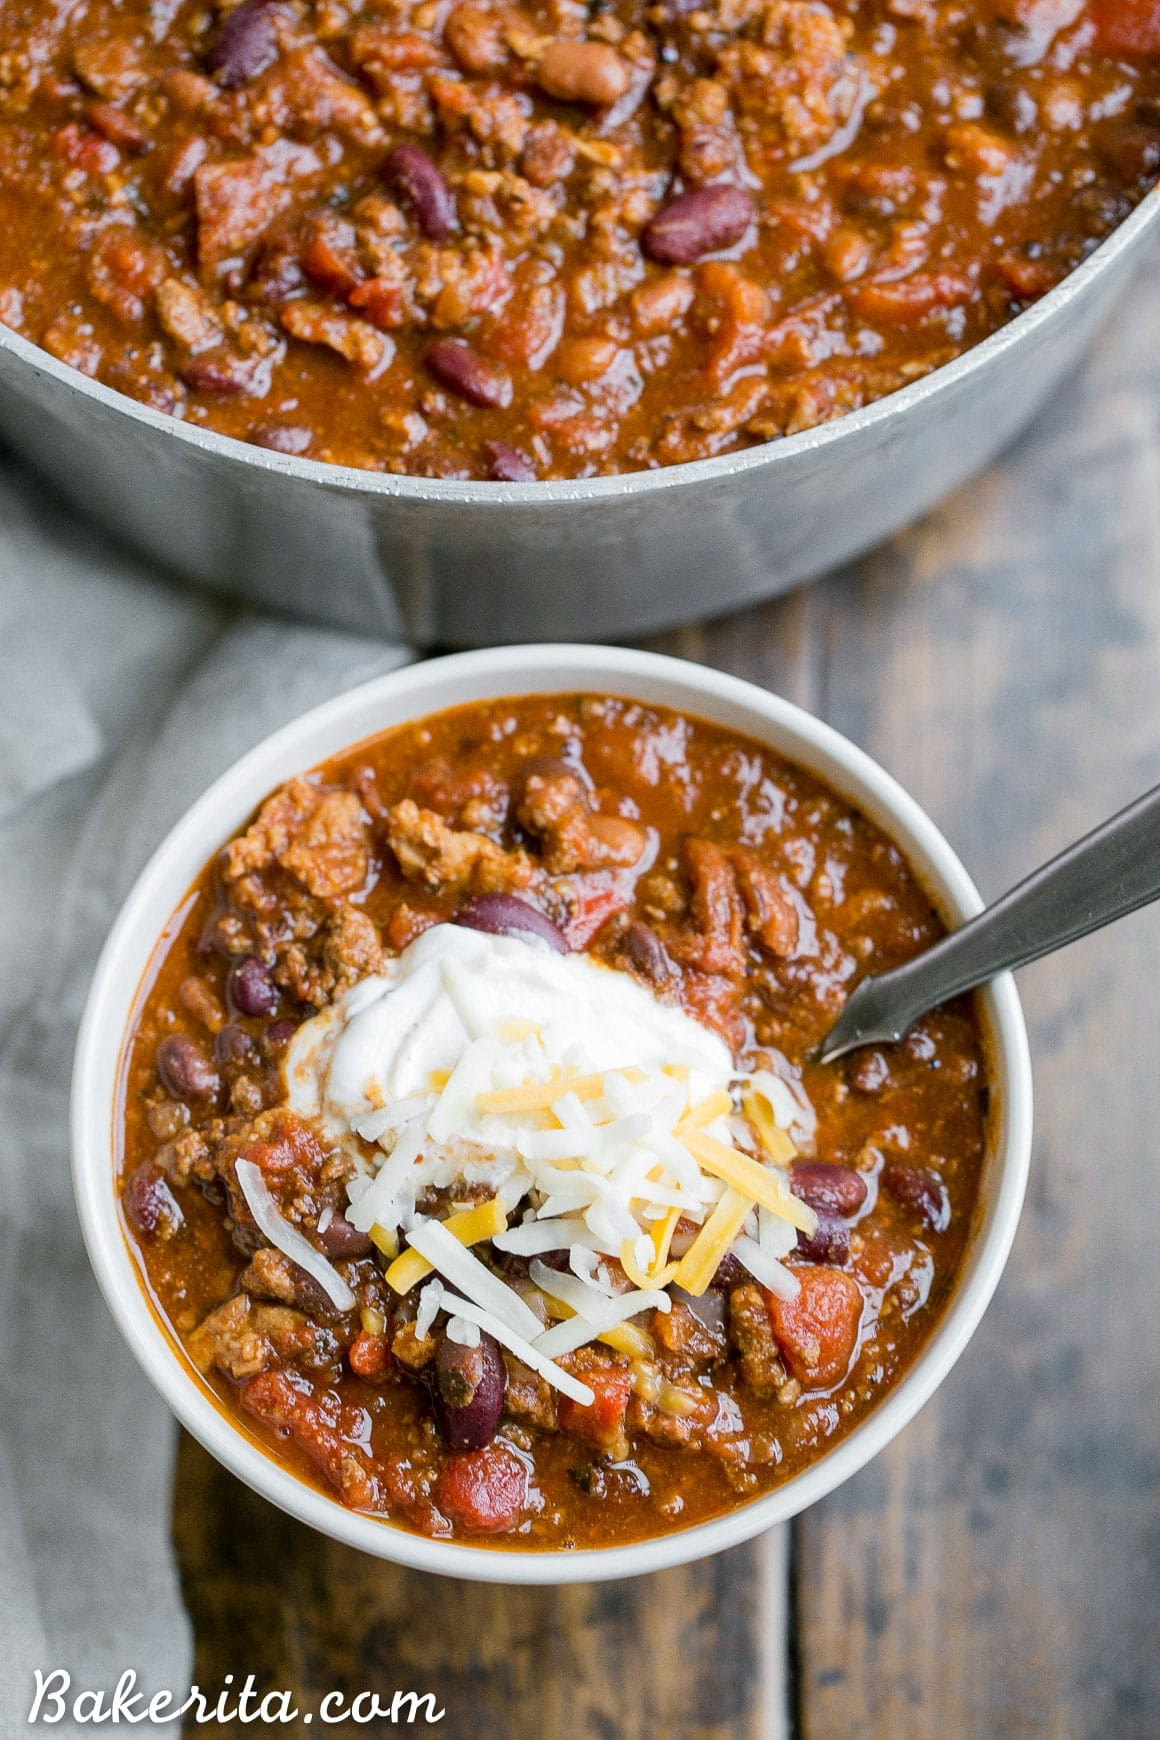 Chili Recipes With Beef
 My Best Chili